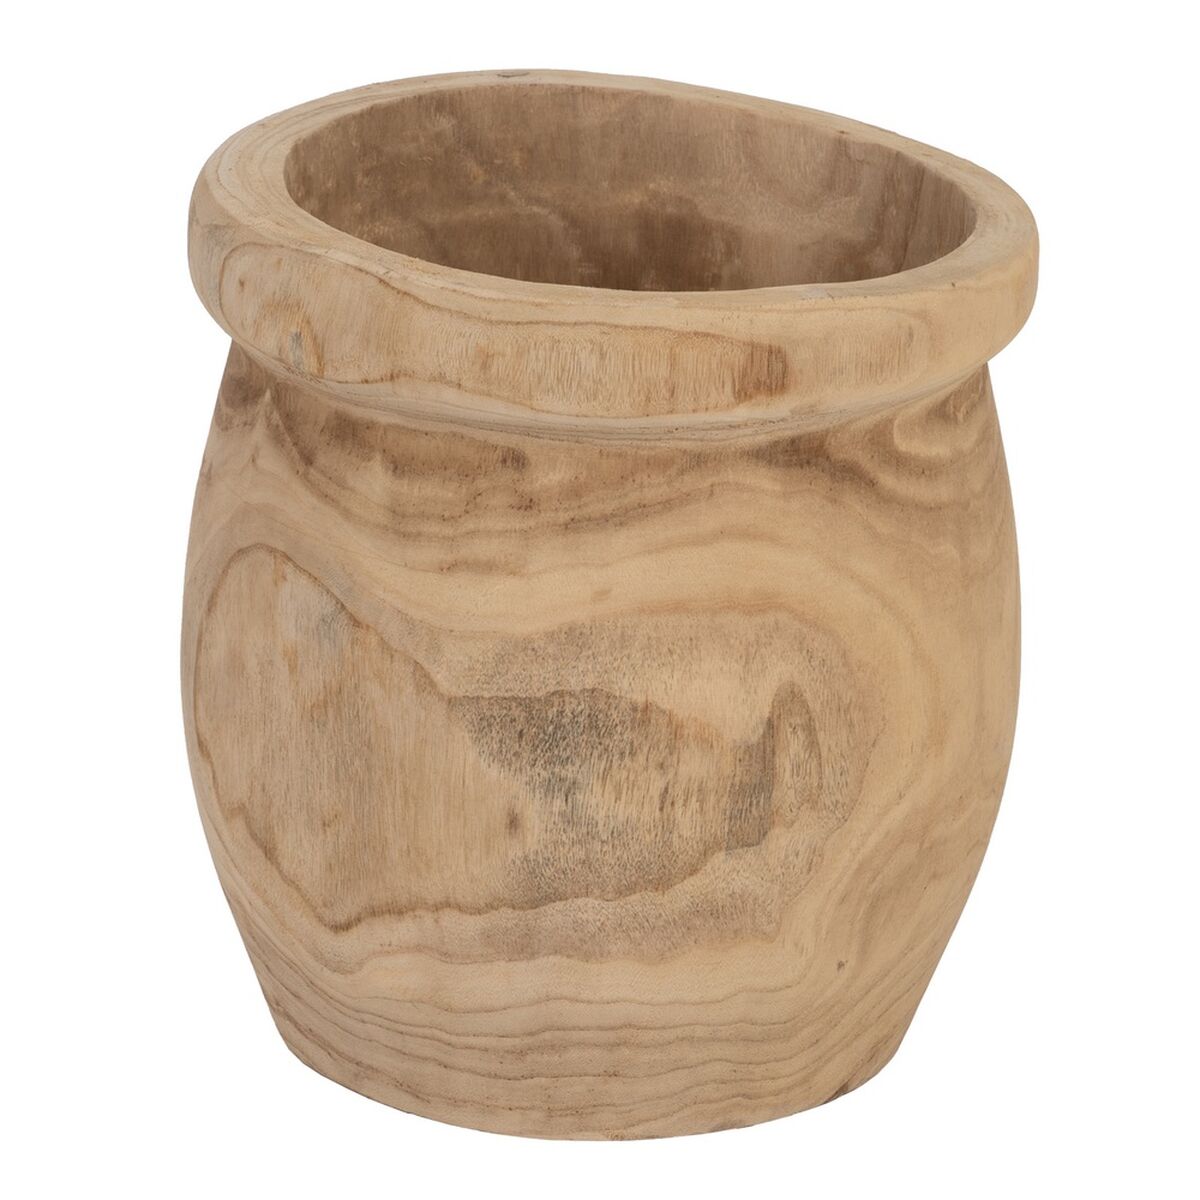 Set of Planters Natural Paolownia wood 43 x 43 x 44 cm (3 Units)